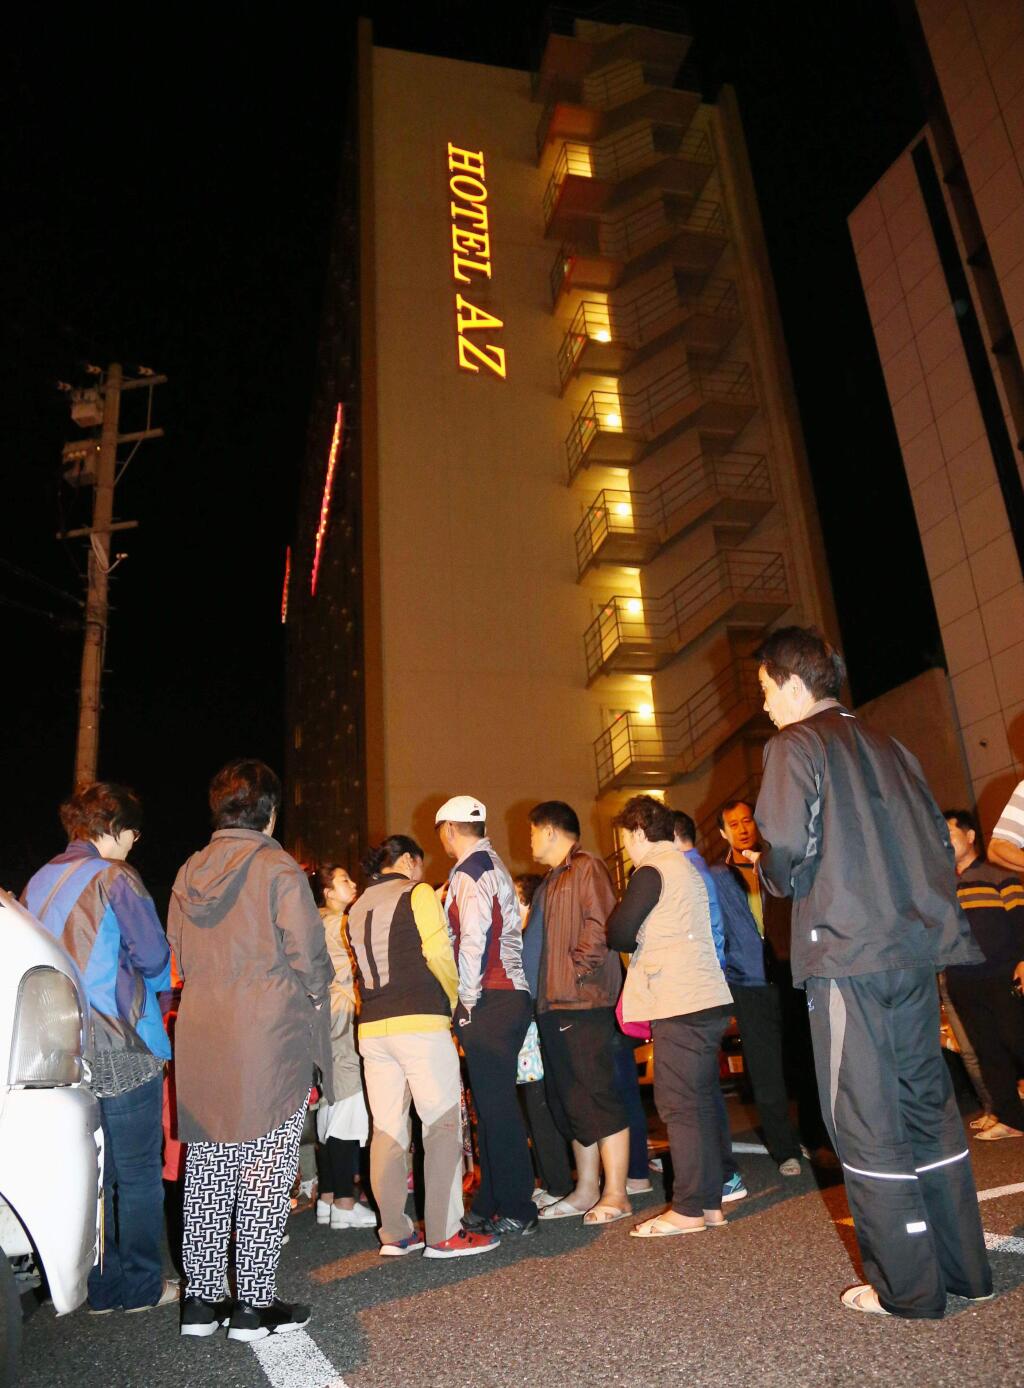 People gather outside a hotel after an earthquake in Kumamoto, southern Japan, Thursday, April 14, 2016. A powerful earthquake with a preliminary magnitude of 6.4 has struck southern Japan. Japan's Meteorological Agency said the quake hit at 9:26 p.m. (1226 GMT) and was centered in the Kumamoto prefecture. (Kyodo News via AP)